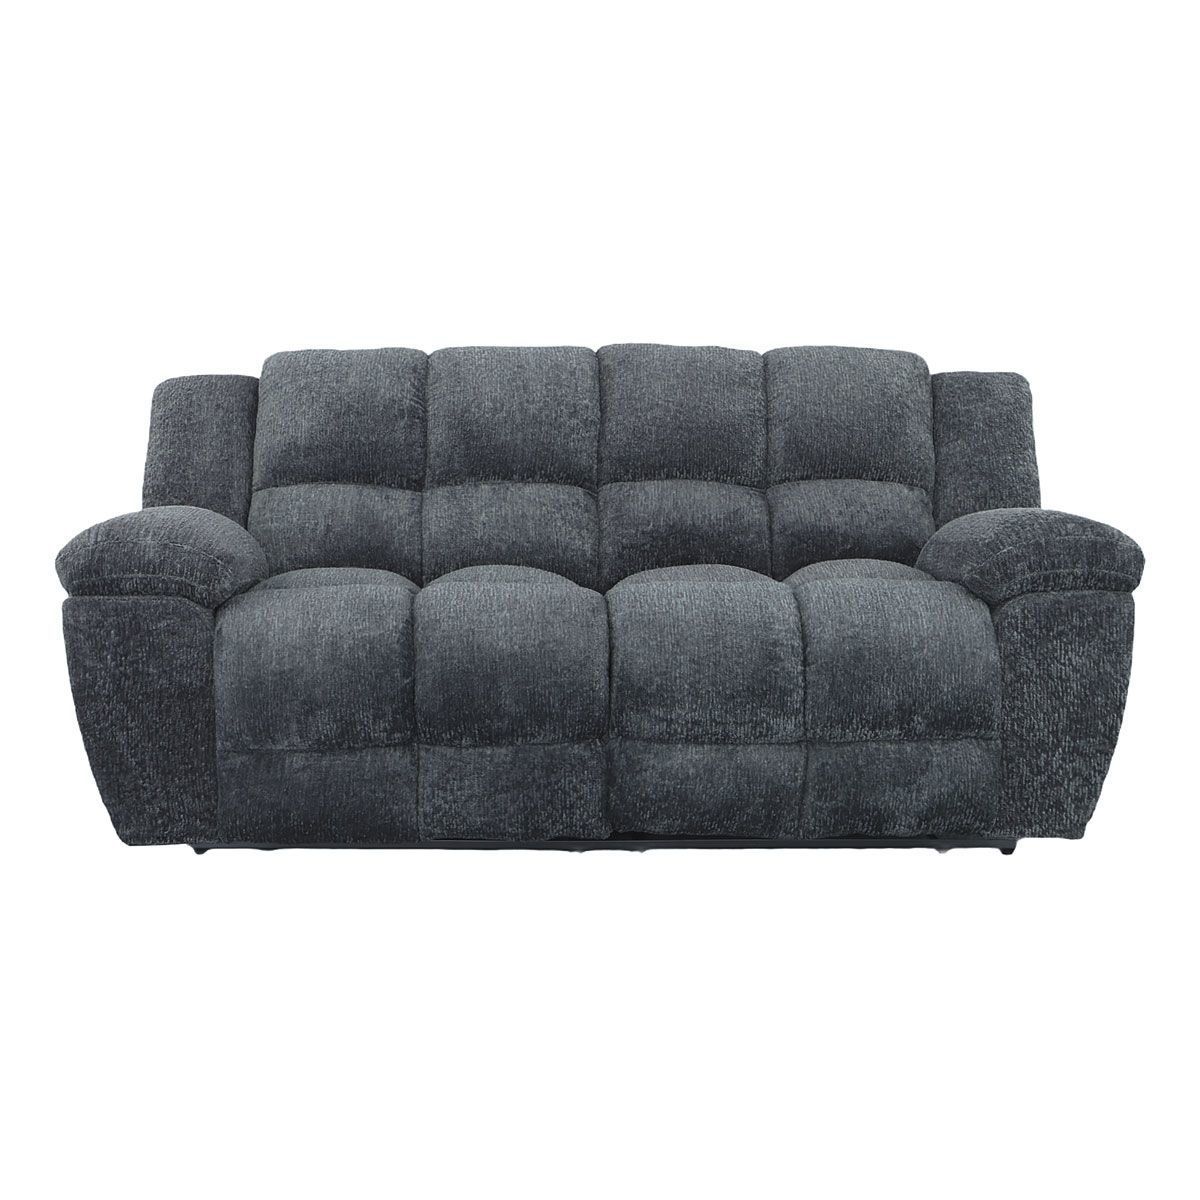 Picture of LOCKLEY MANUAL RECLINING SOFA